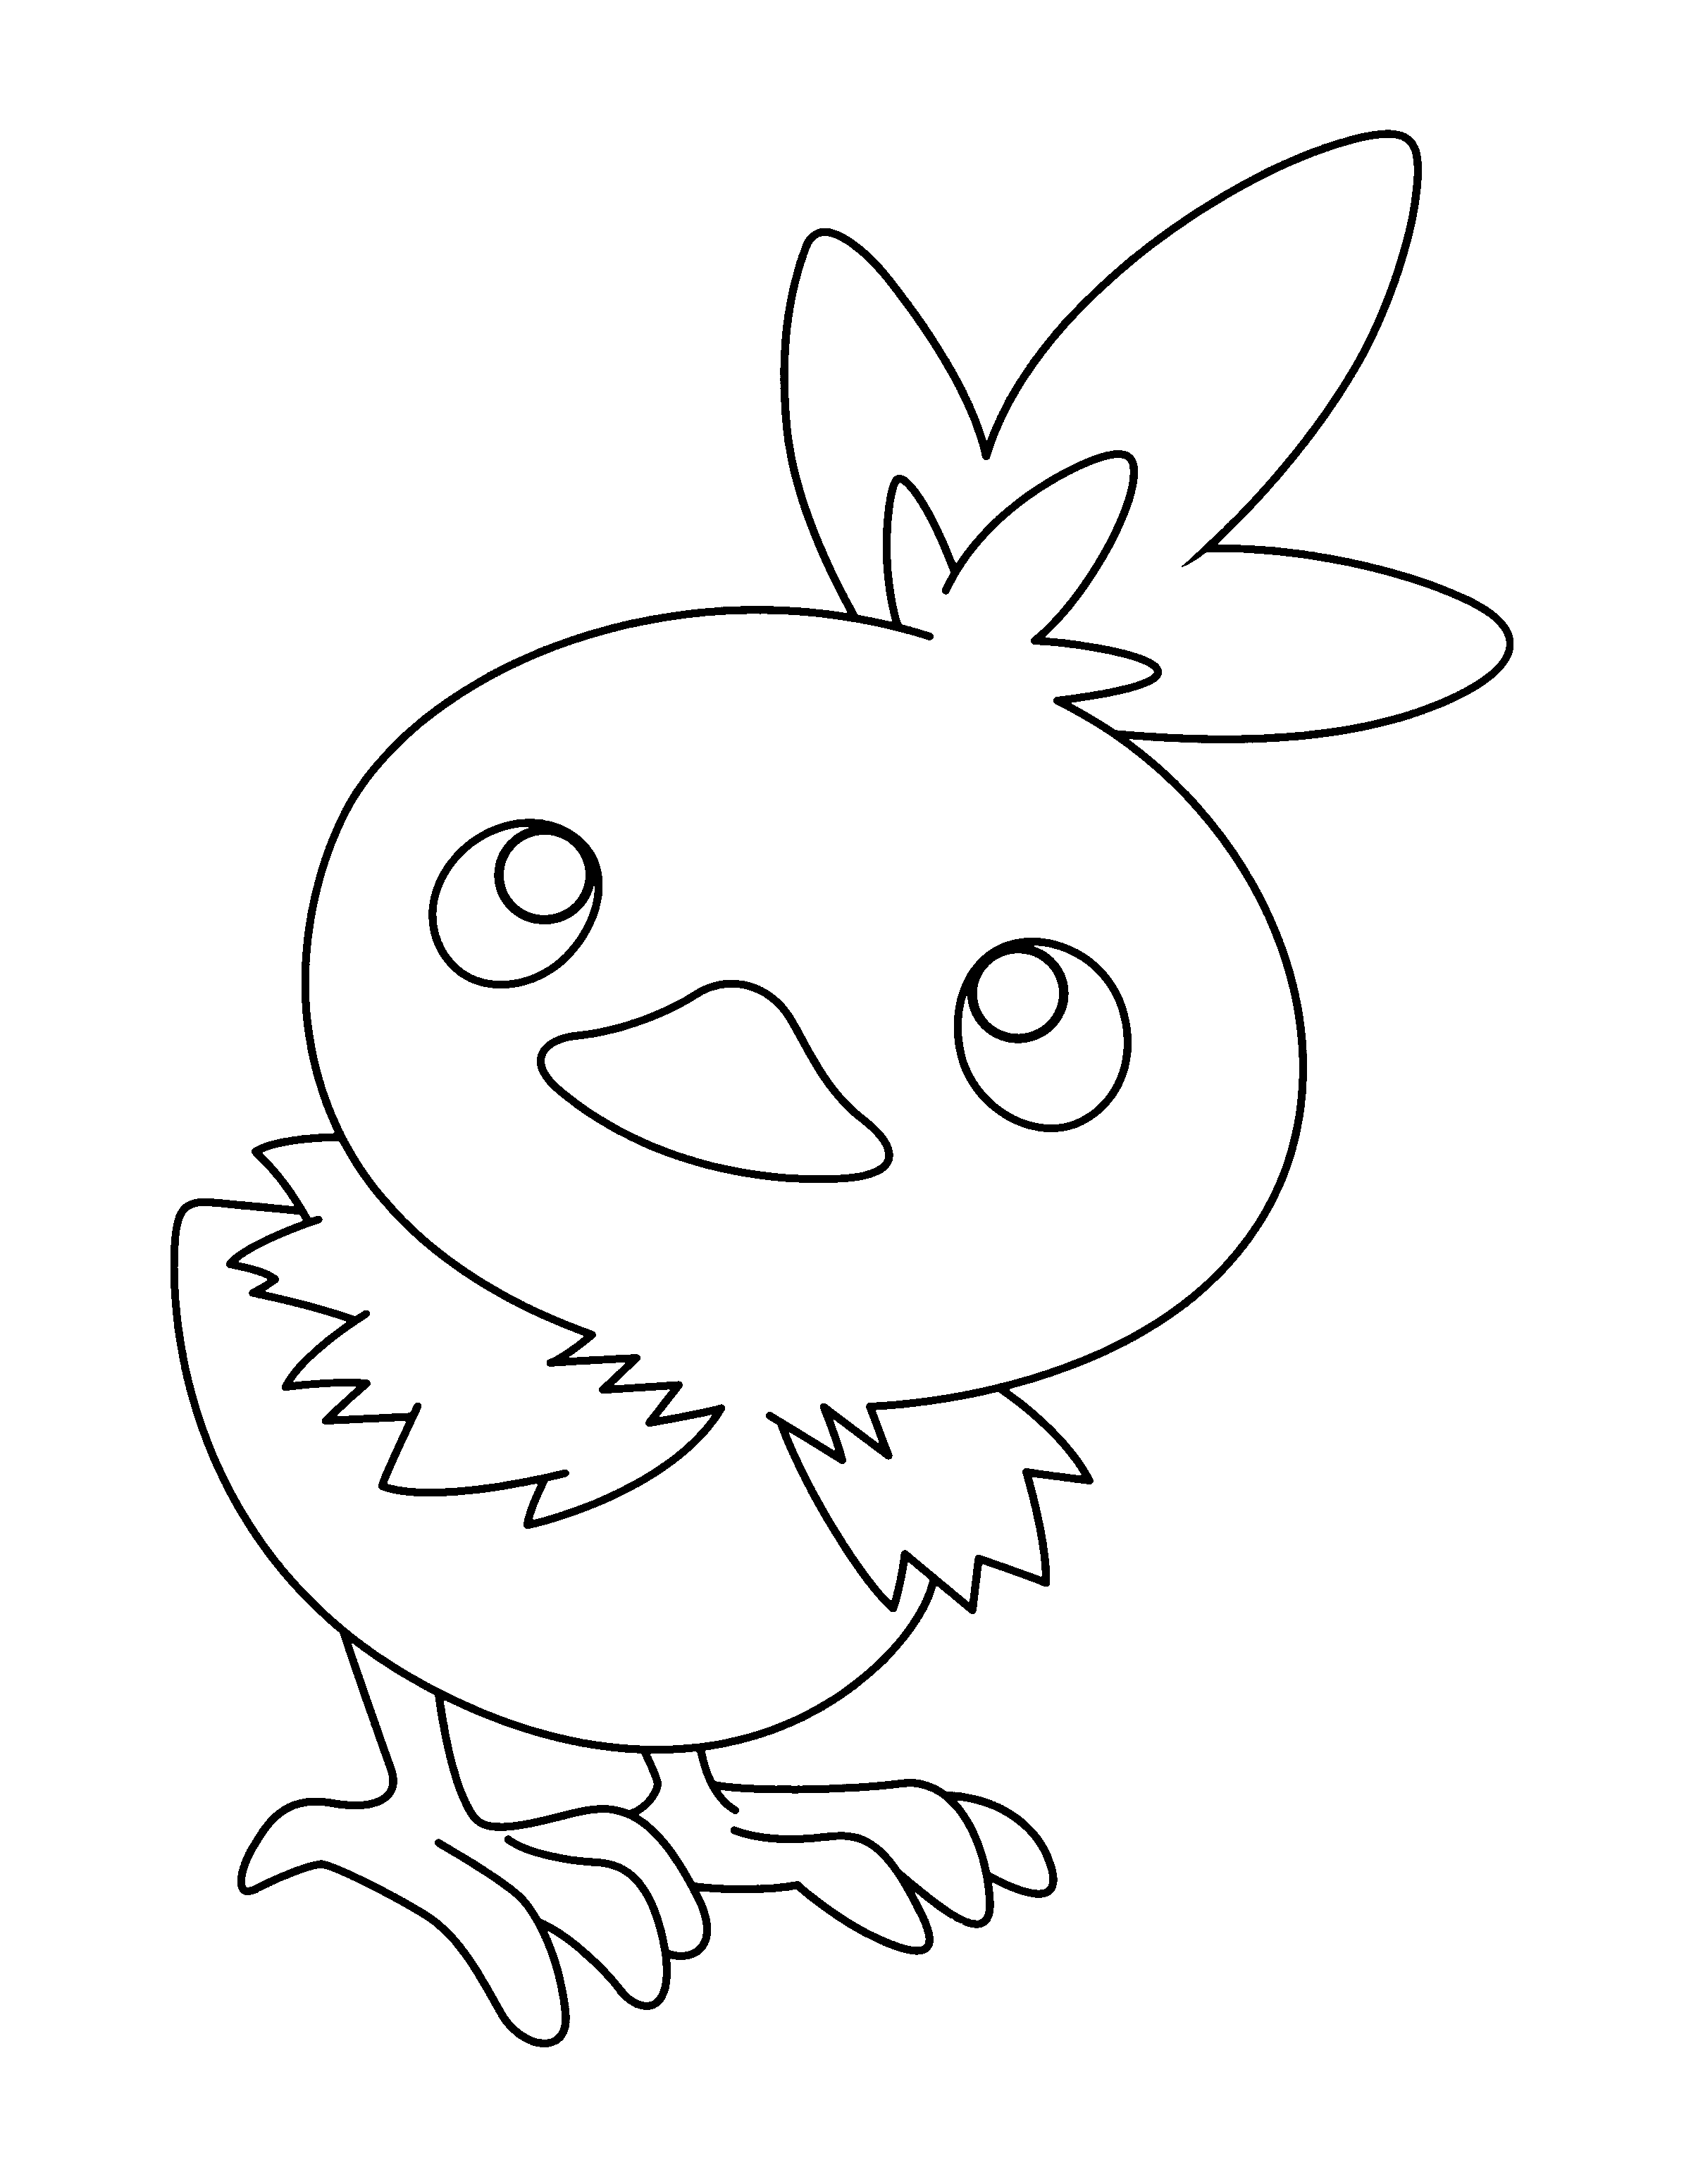 Coloring Page Pokemon Advanced Coloring Pages 48